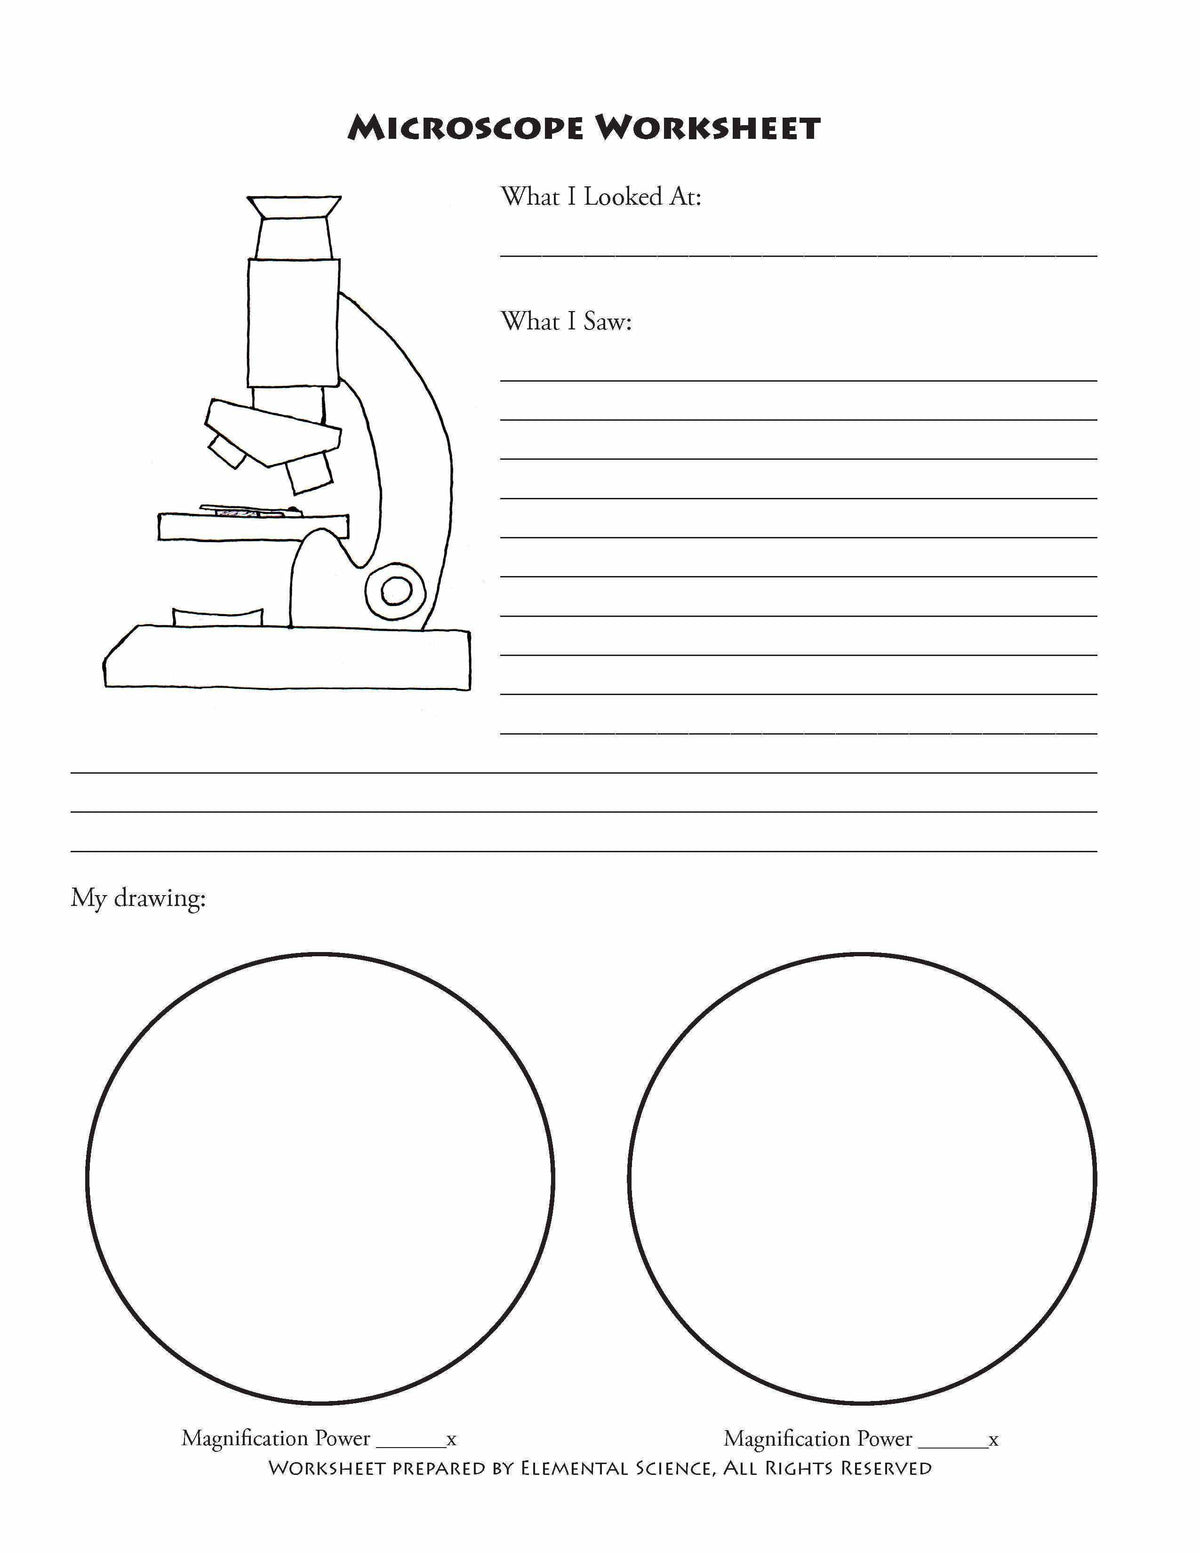 Our Products - Free Microscope Notebooking Printables